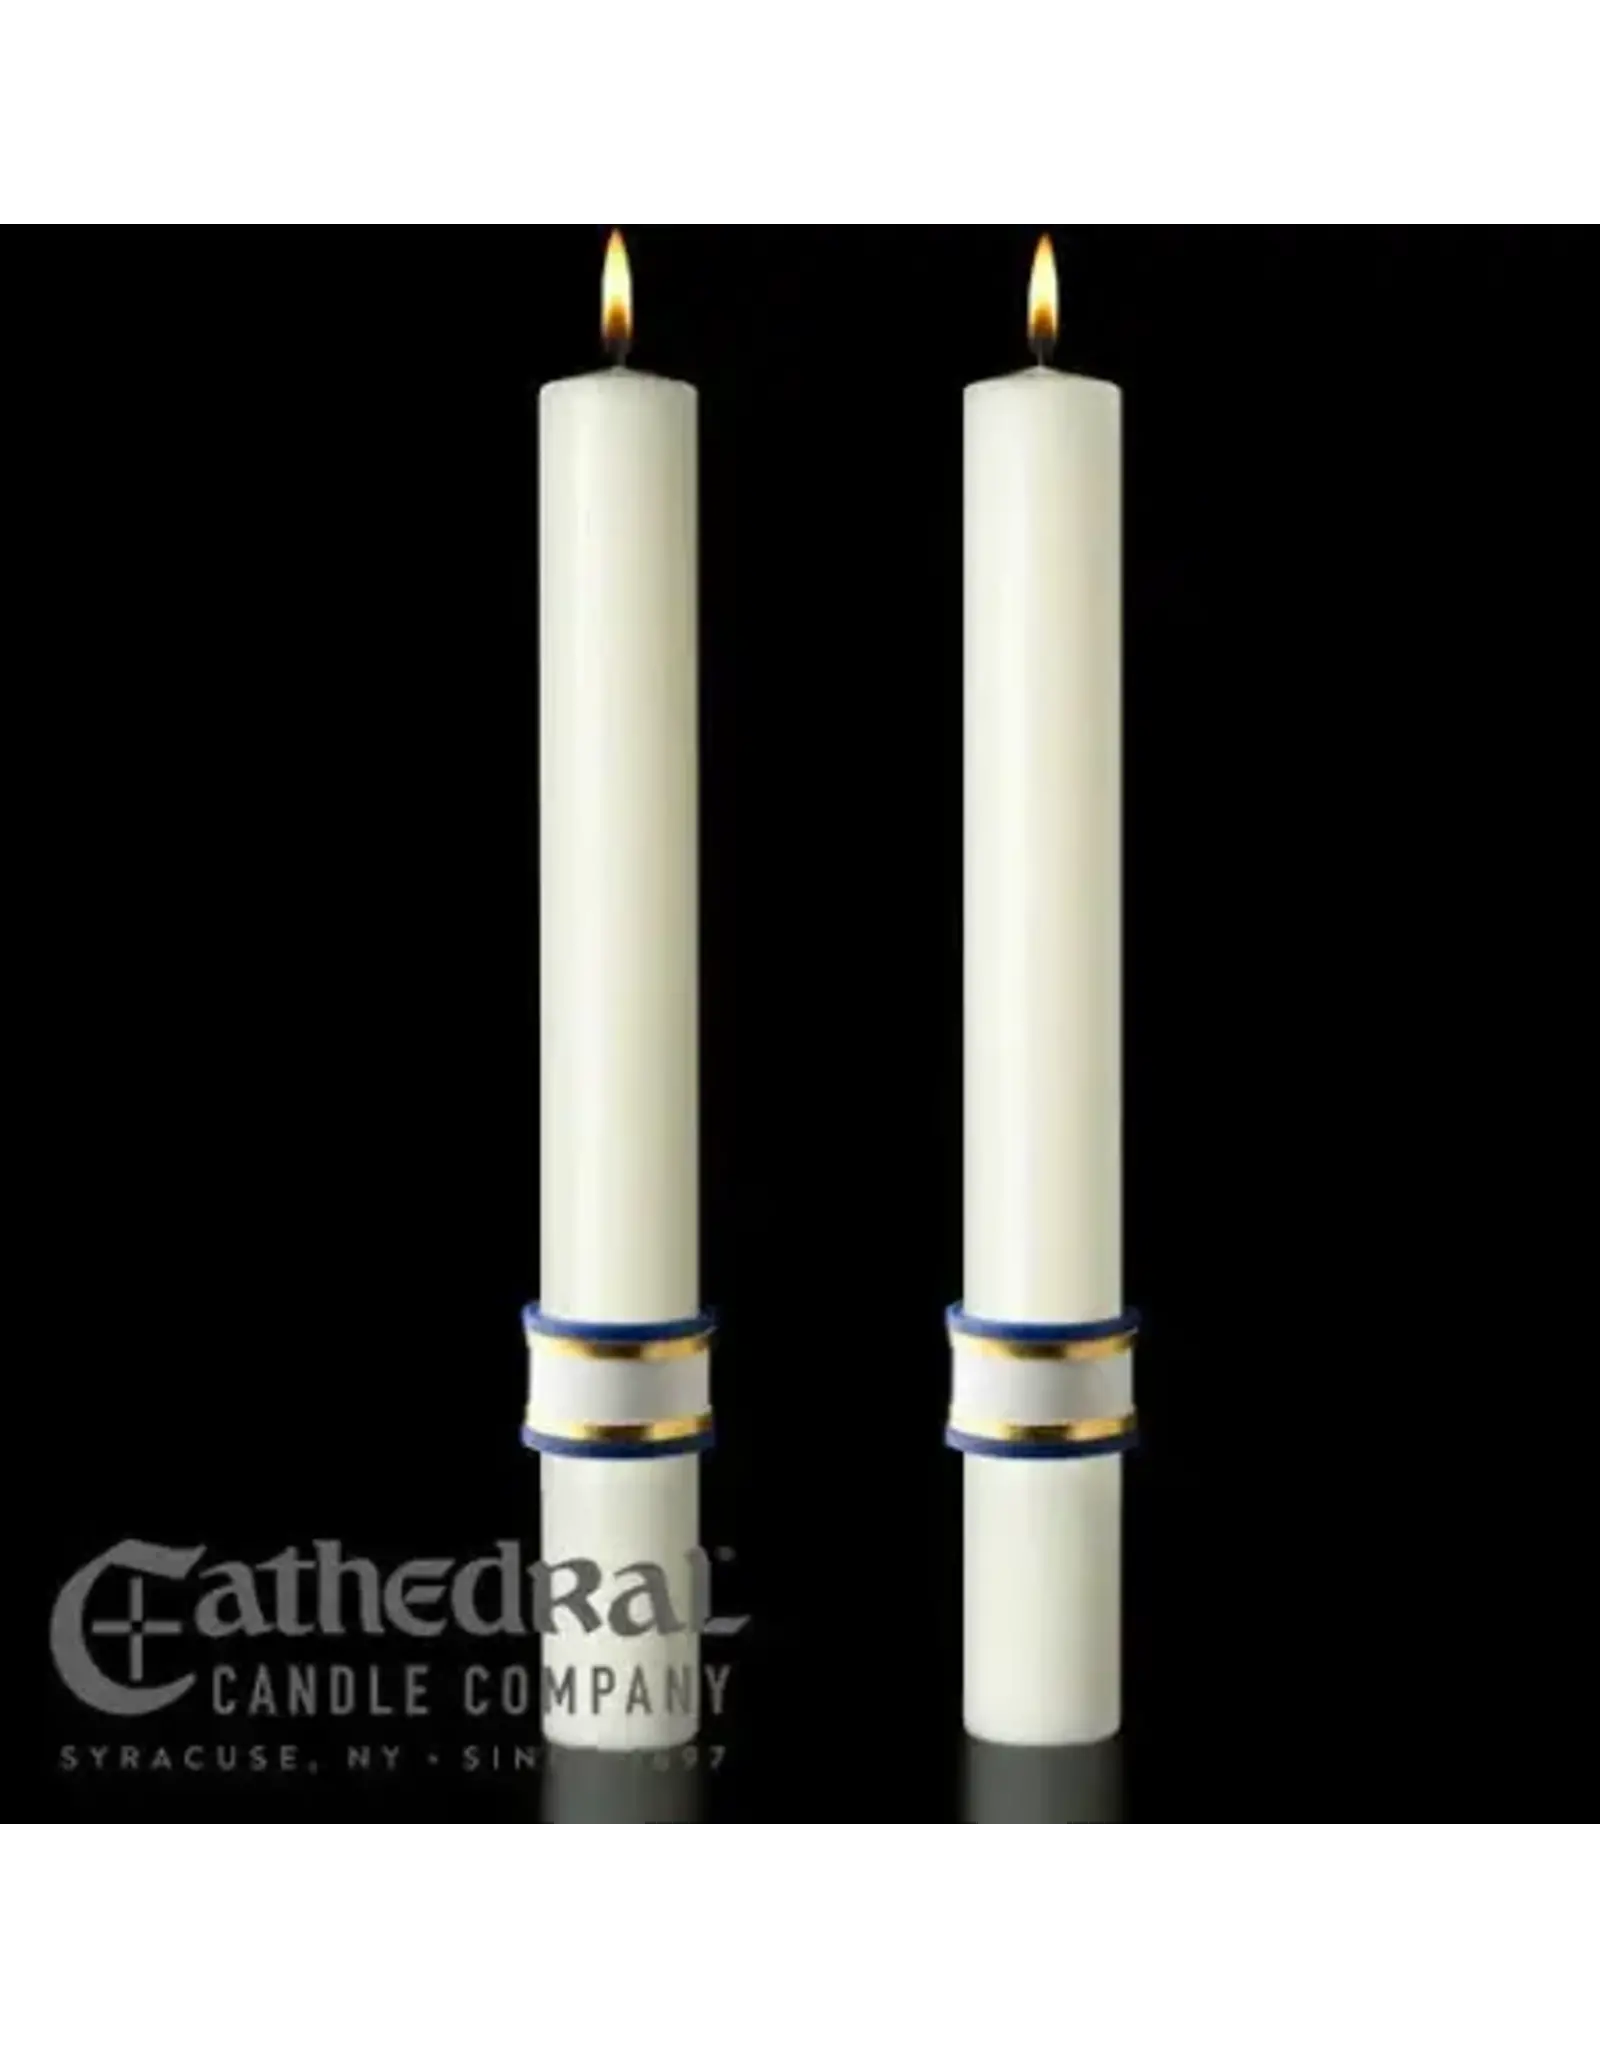 Cathedral Candle Eternal Glory Paschal Candle